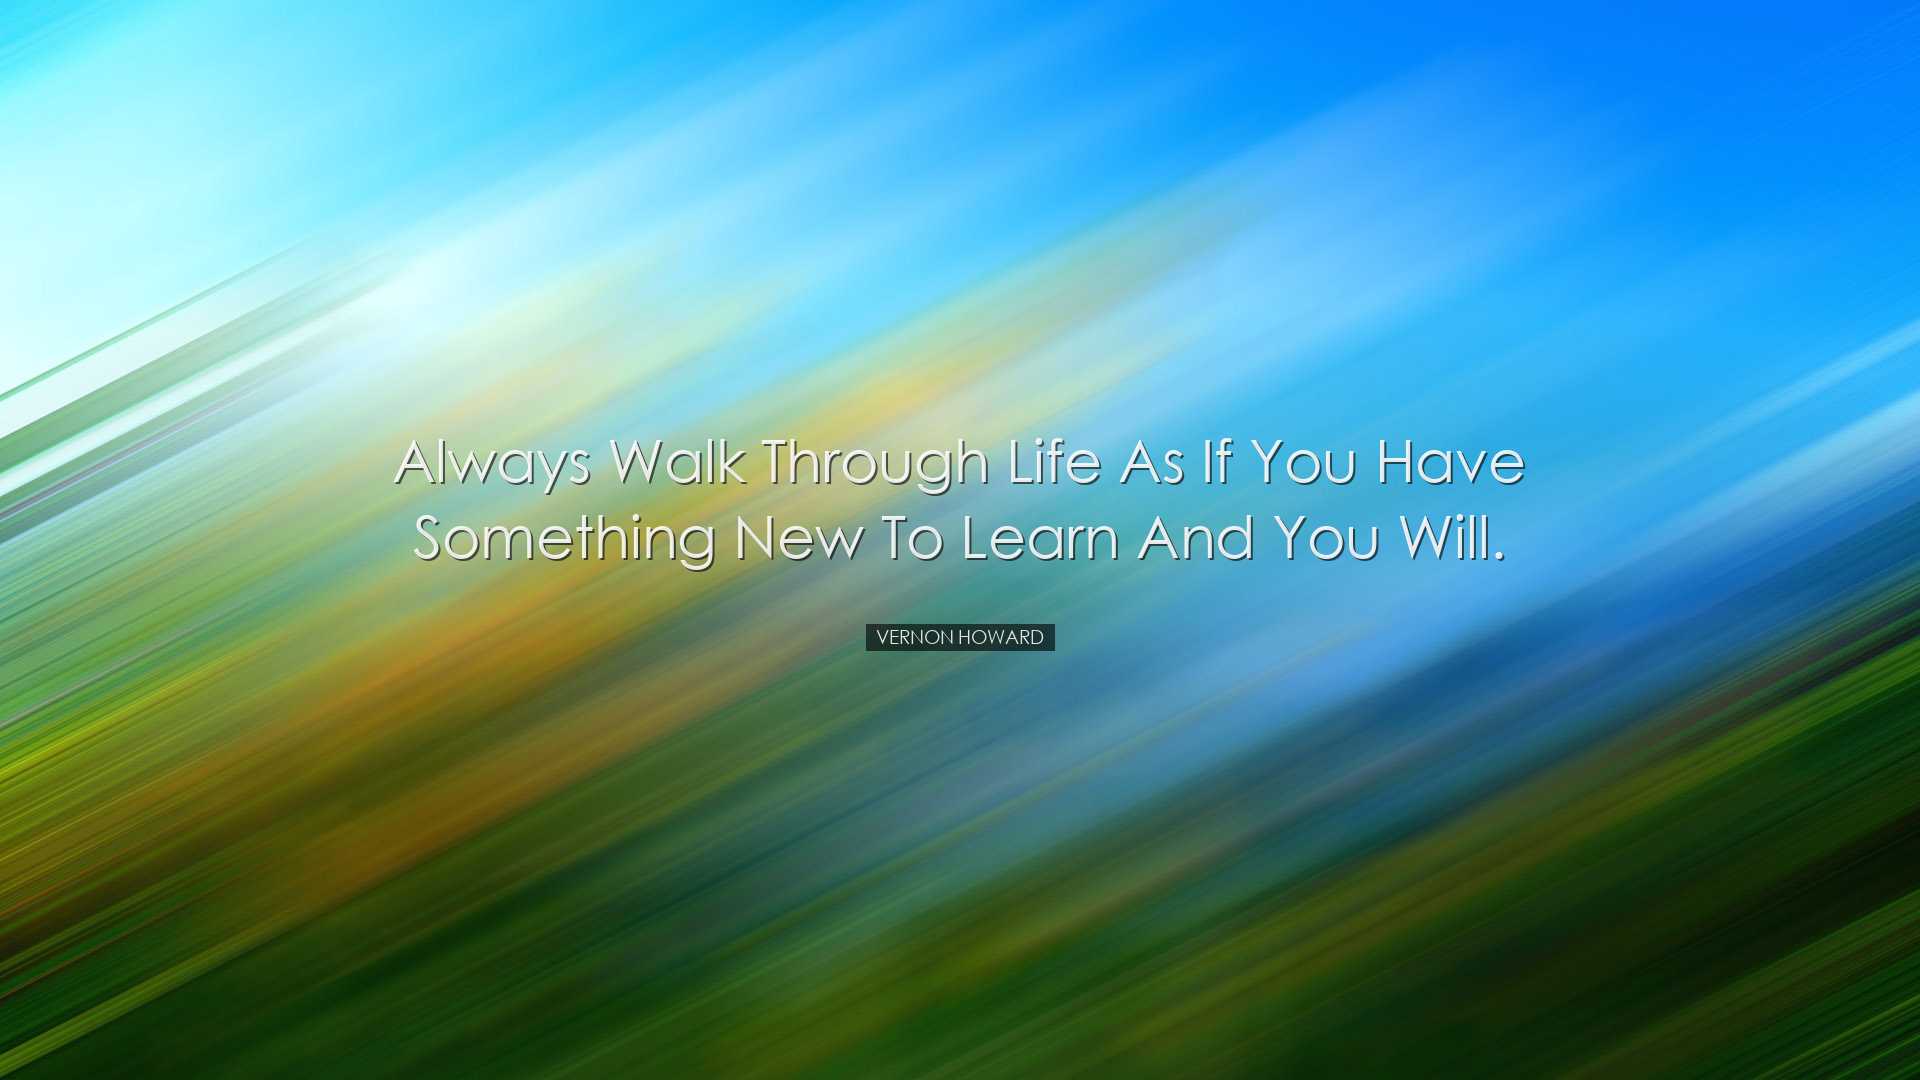 Always walk through life as if you have something new to learn and